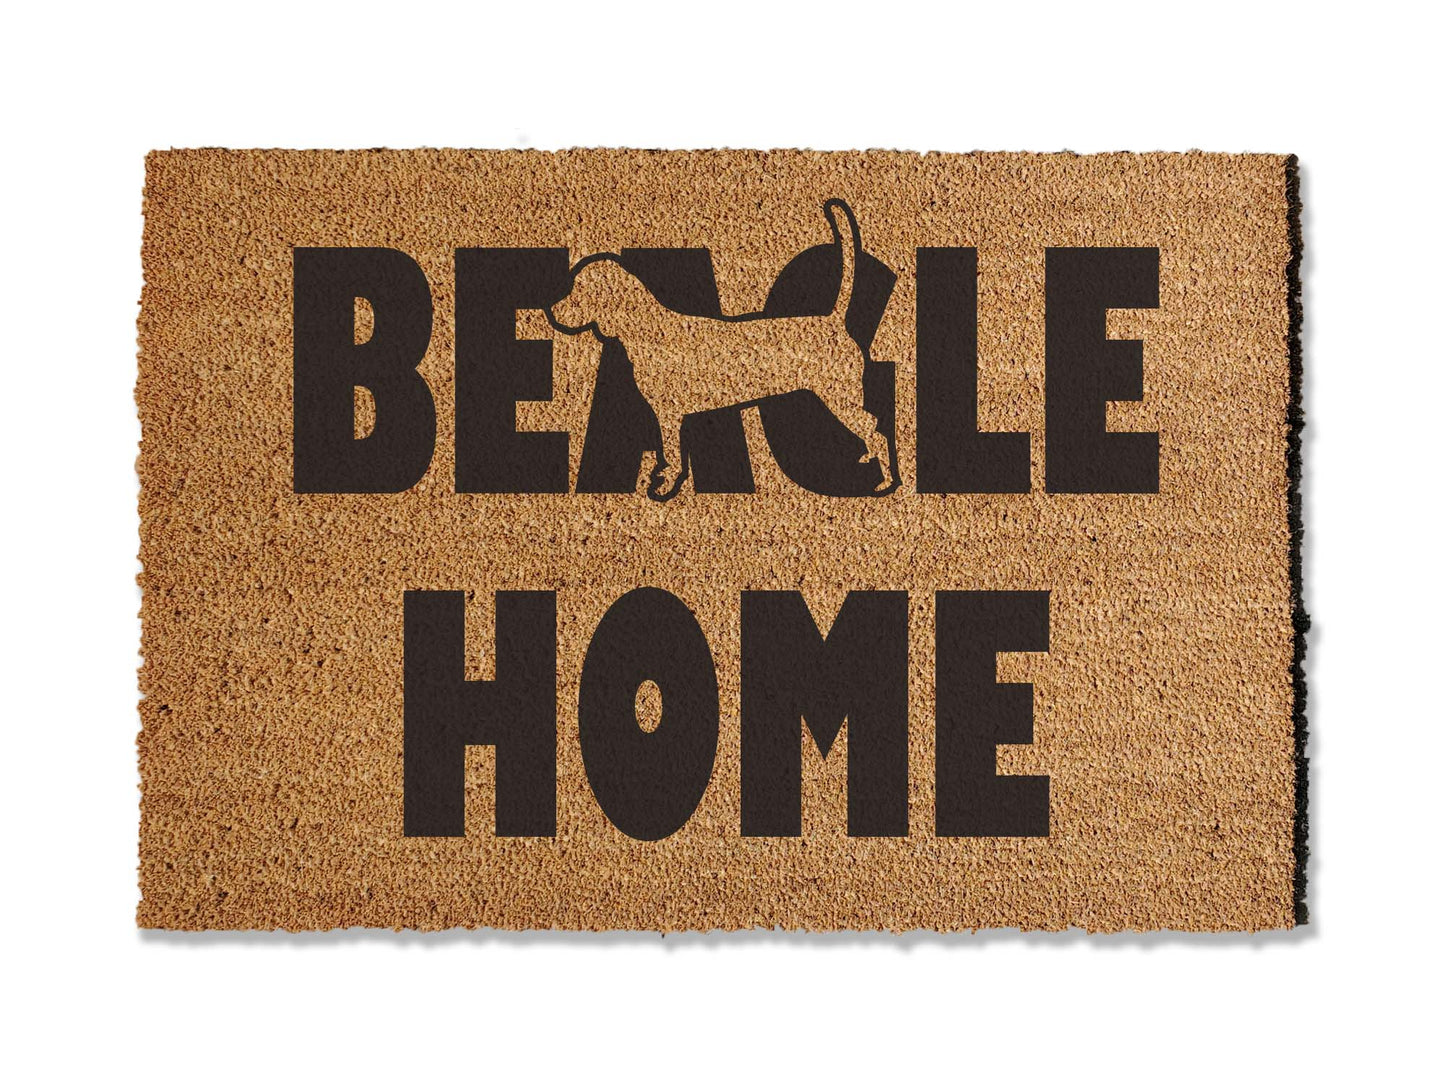 A coir doormat that is 24 inches by 36 inches what the text BEAGLE HOME on it and the silhouette of a beagle.